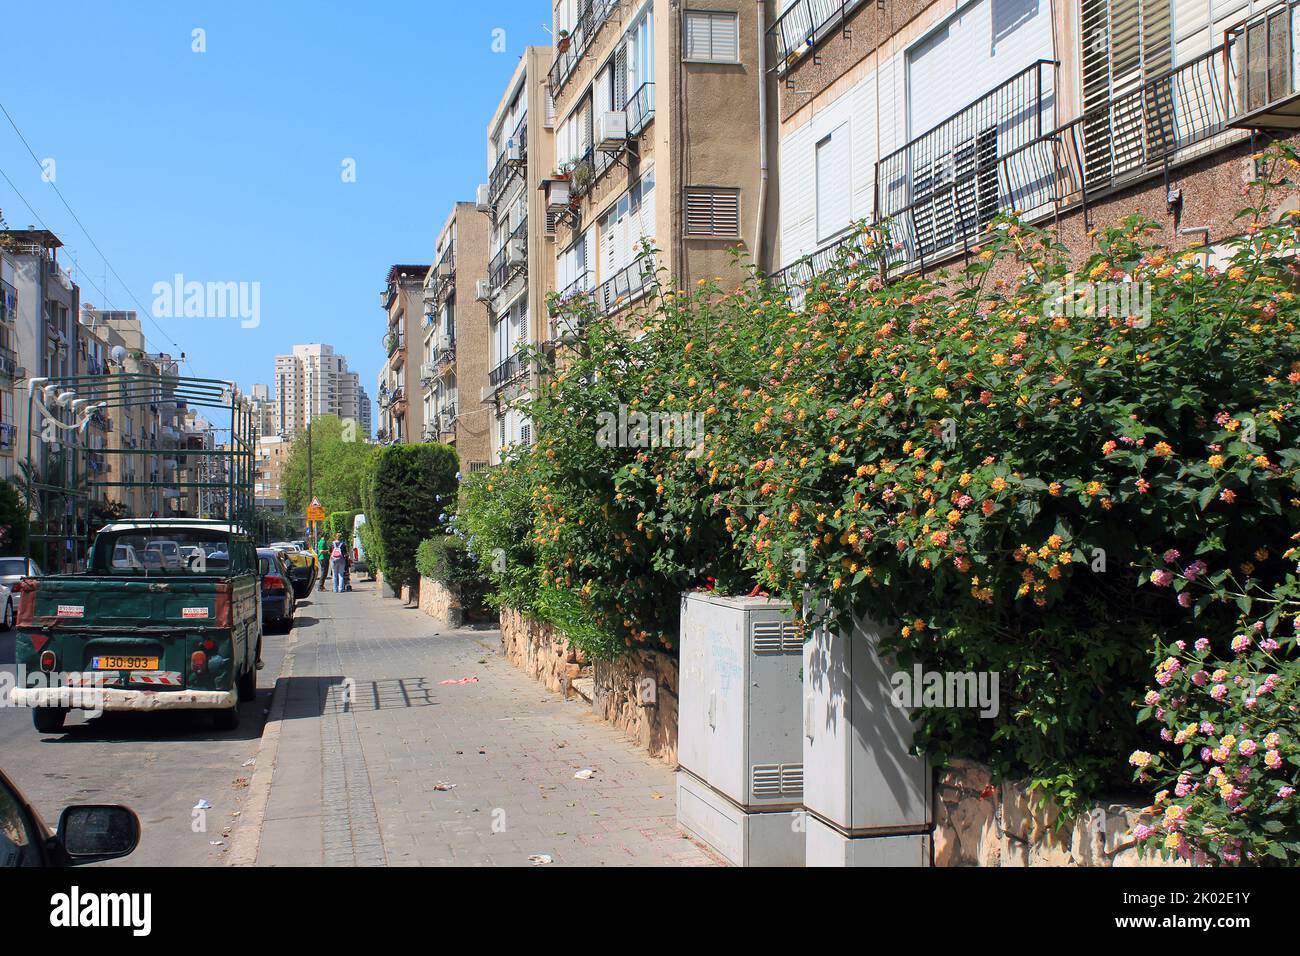 BAT YAM, ISRAEL - MAY 6, 2011: This is one of the residential streets (Bar Ilan Street) in the suburb of Tel Aviv. Stock Photo